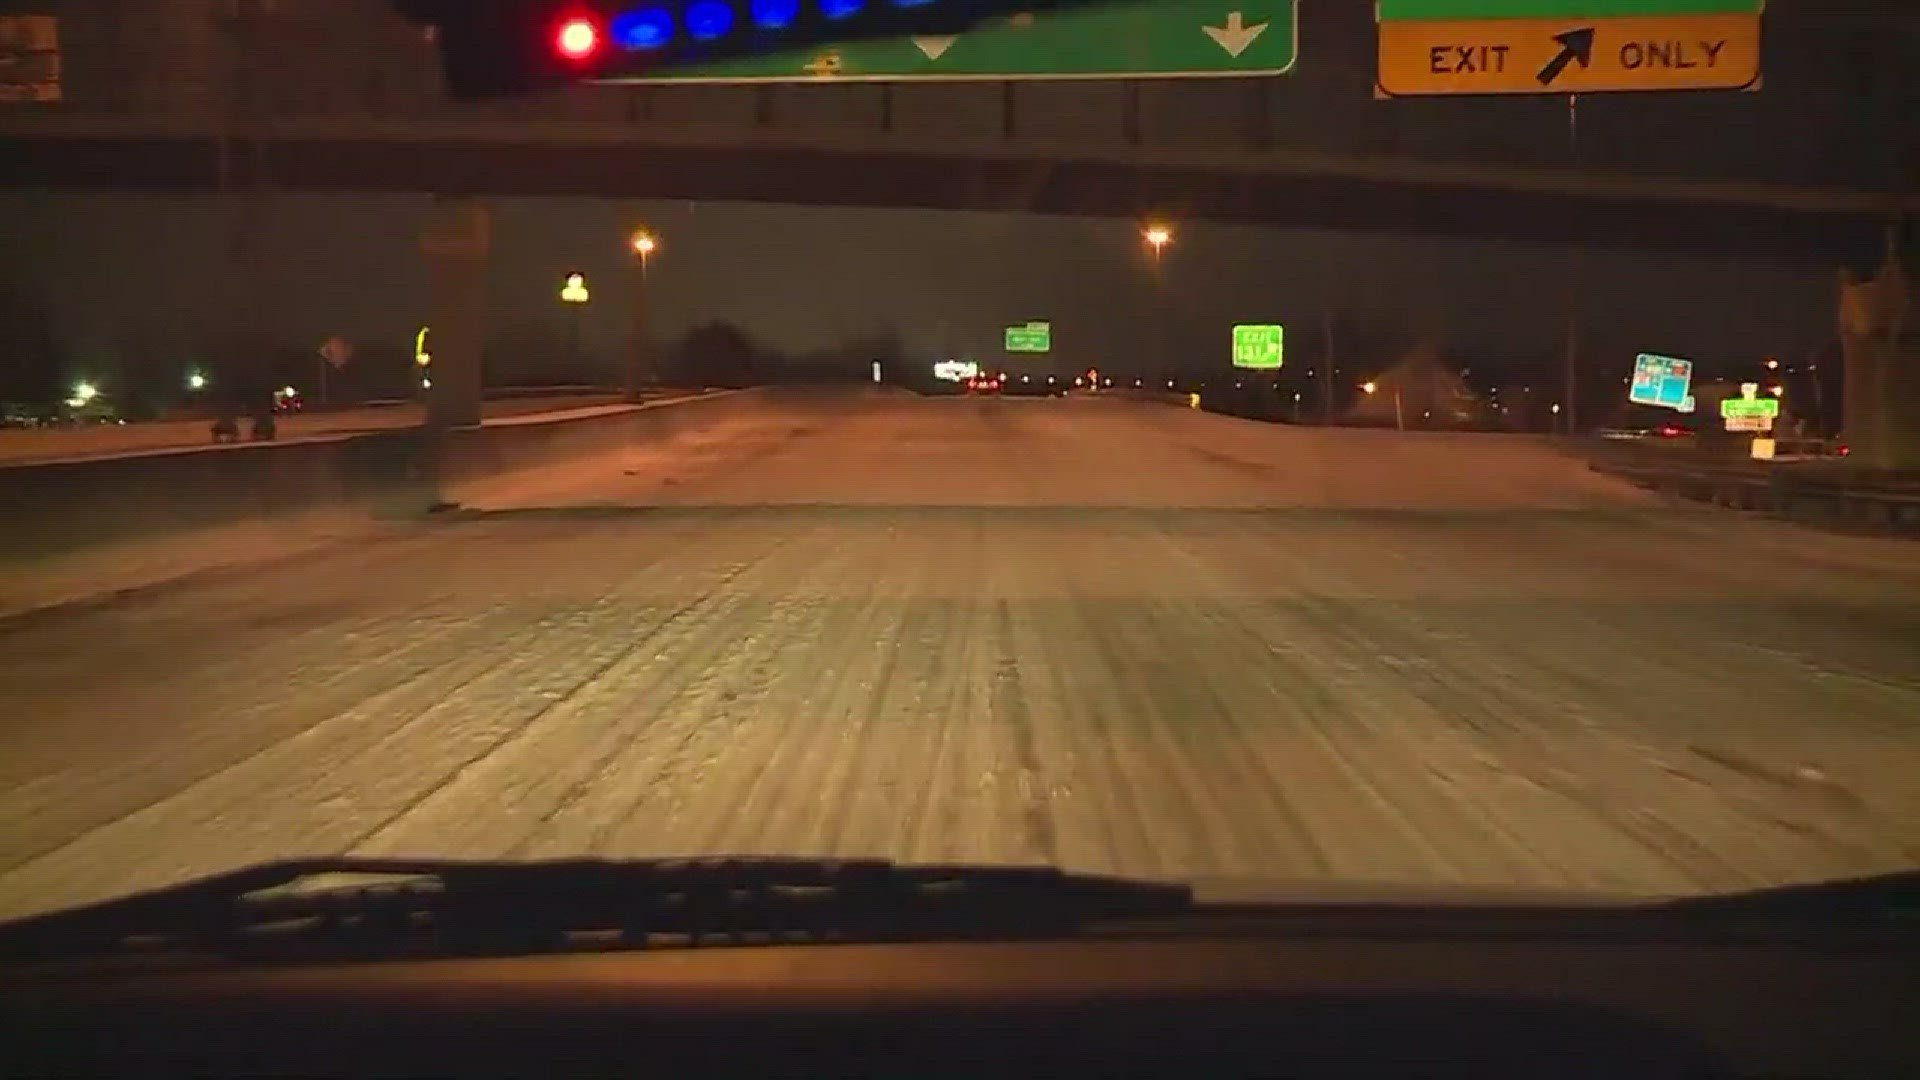 Jan. 13, 2018: The roads are messy after snowy conditions cleared the area. Here's what it was like driving along I-77 North in Akron toward Fairlawn around 5 a.m. today. Stay safe out there!